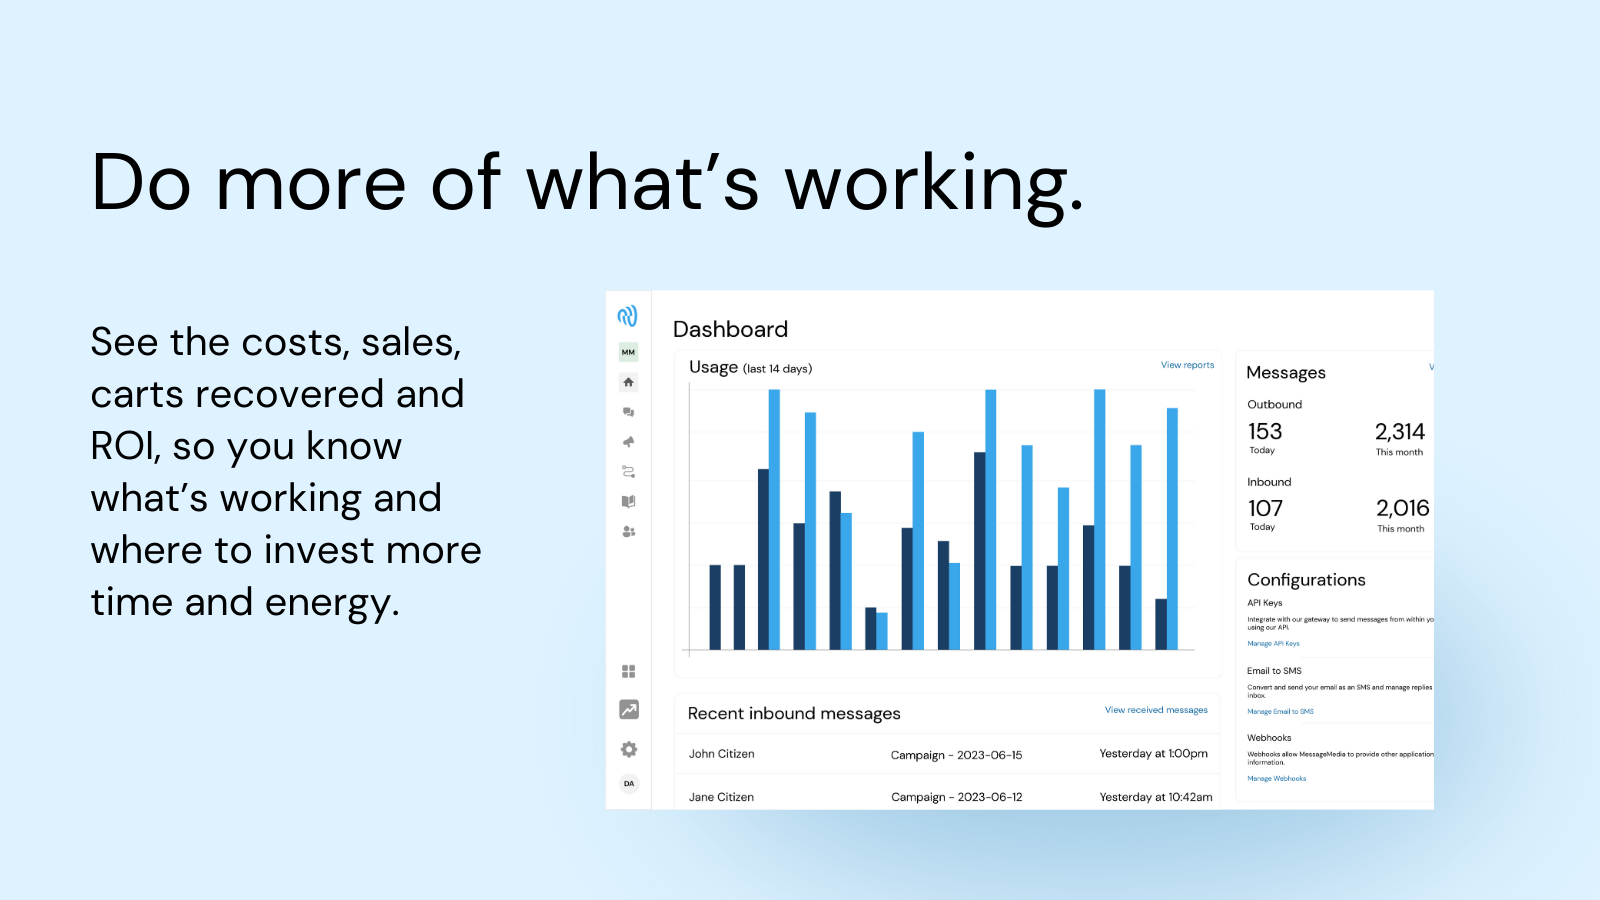 Turn your real-time data into growth. SMS reporting for the win.